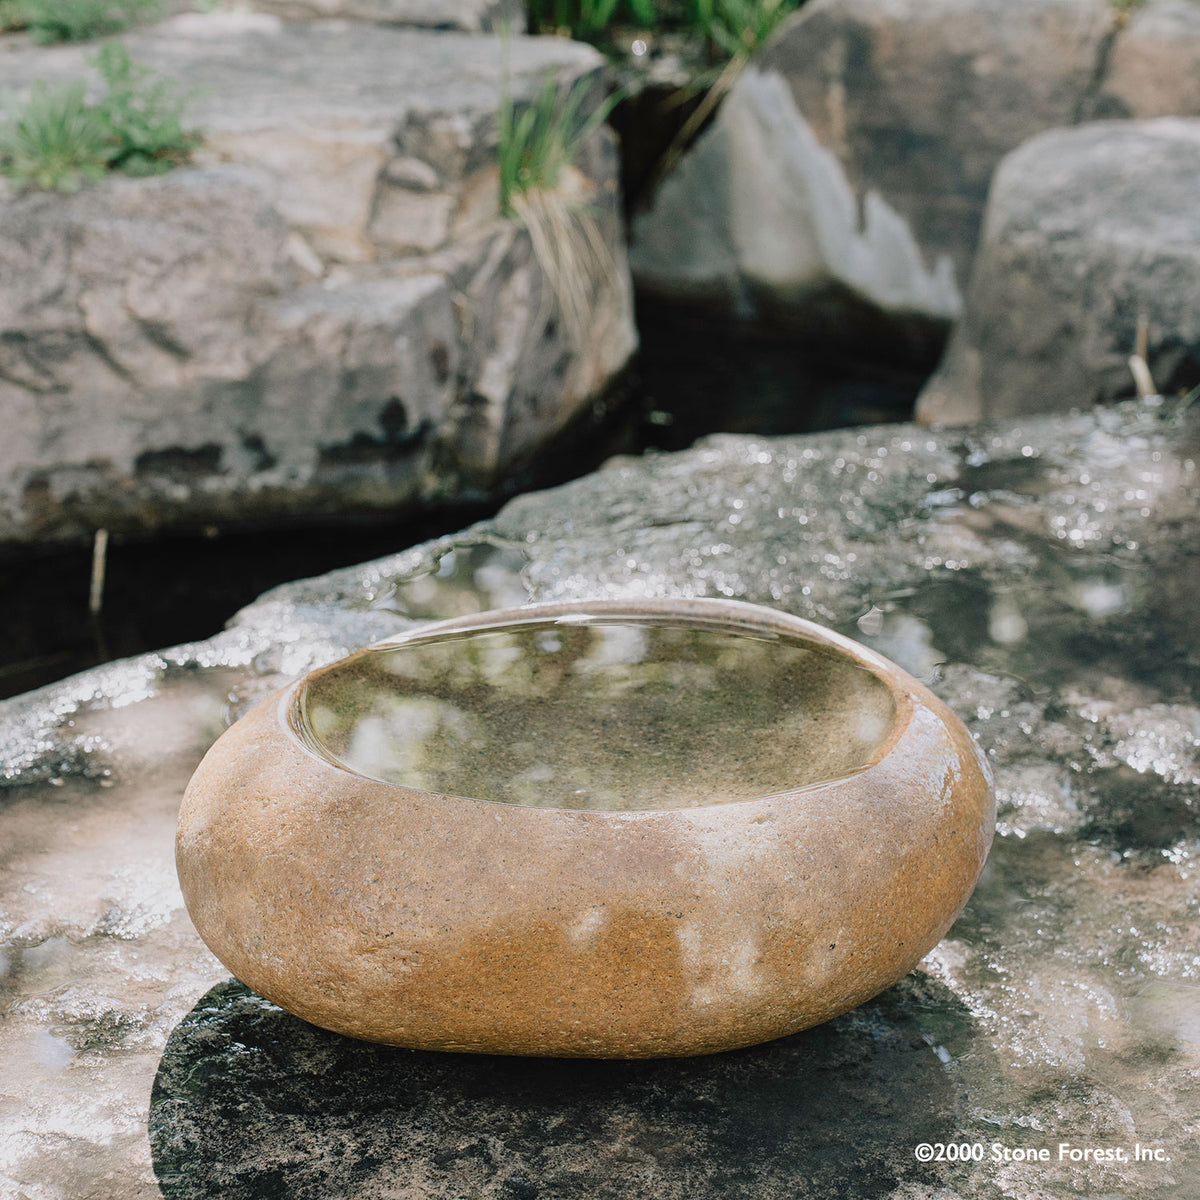 Riverstone Wabi Basin carved from a small natural granite boulder image 5 of 5